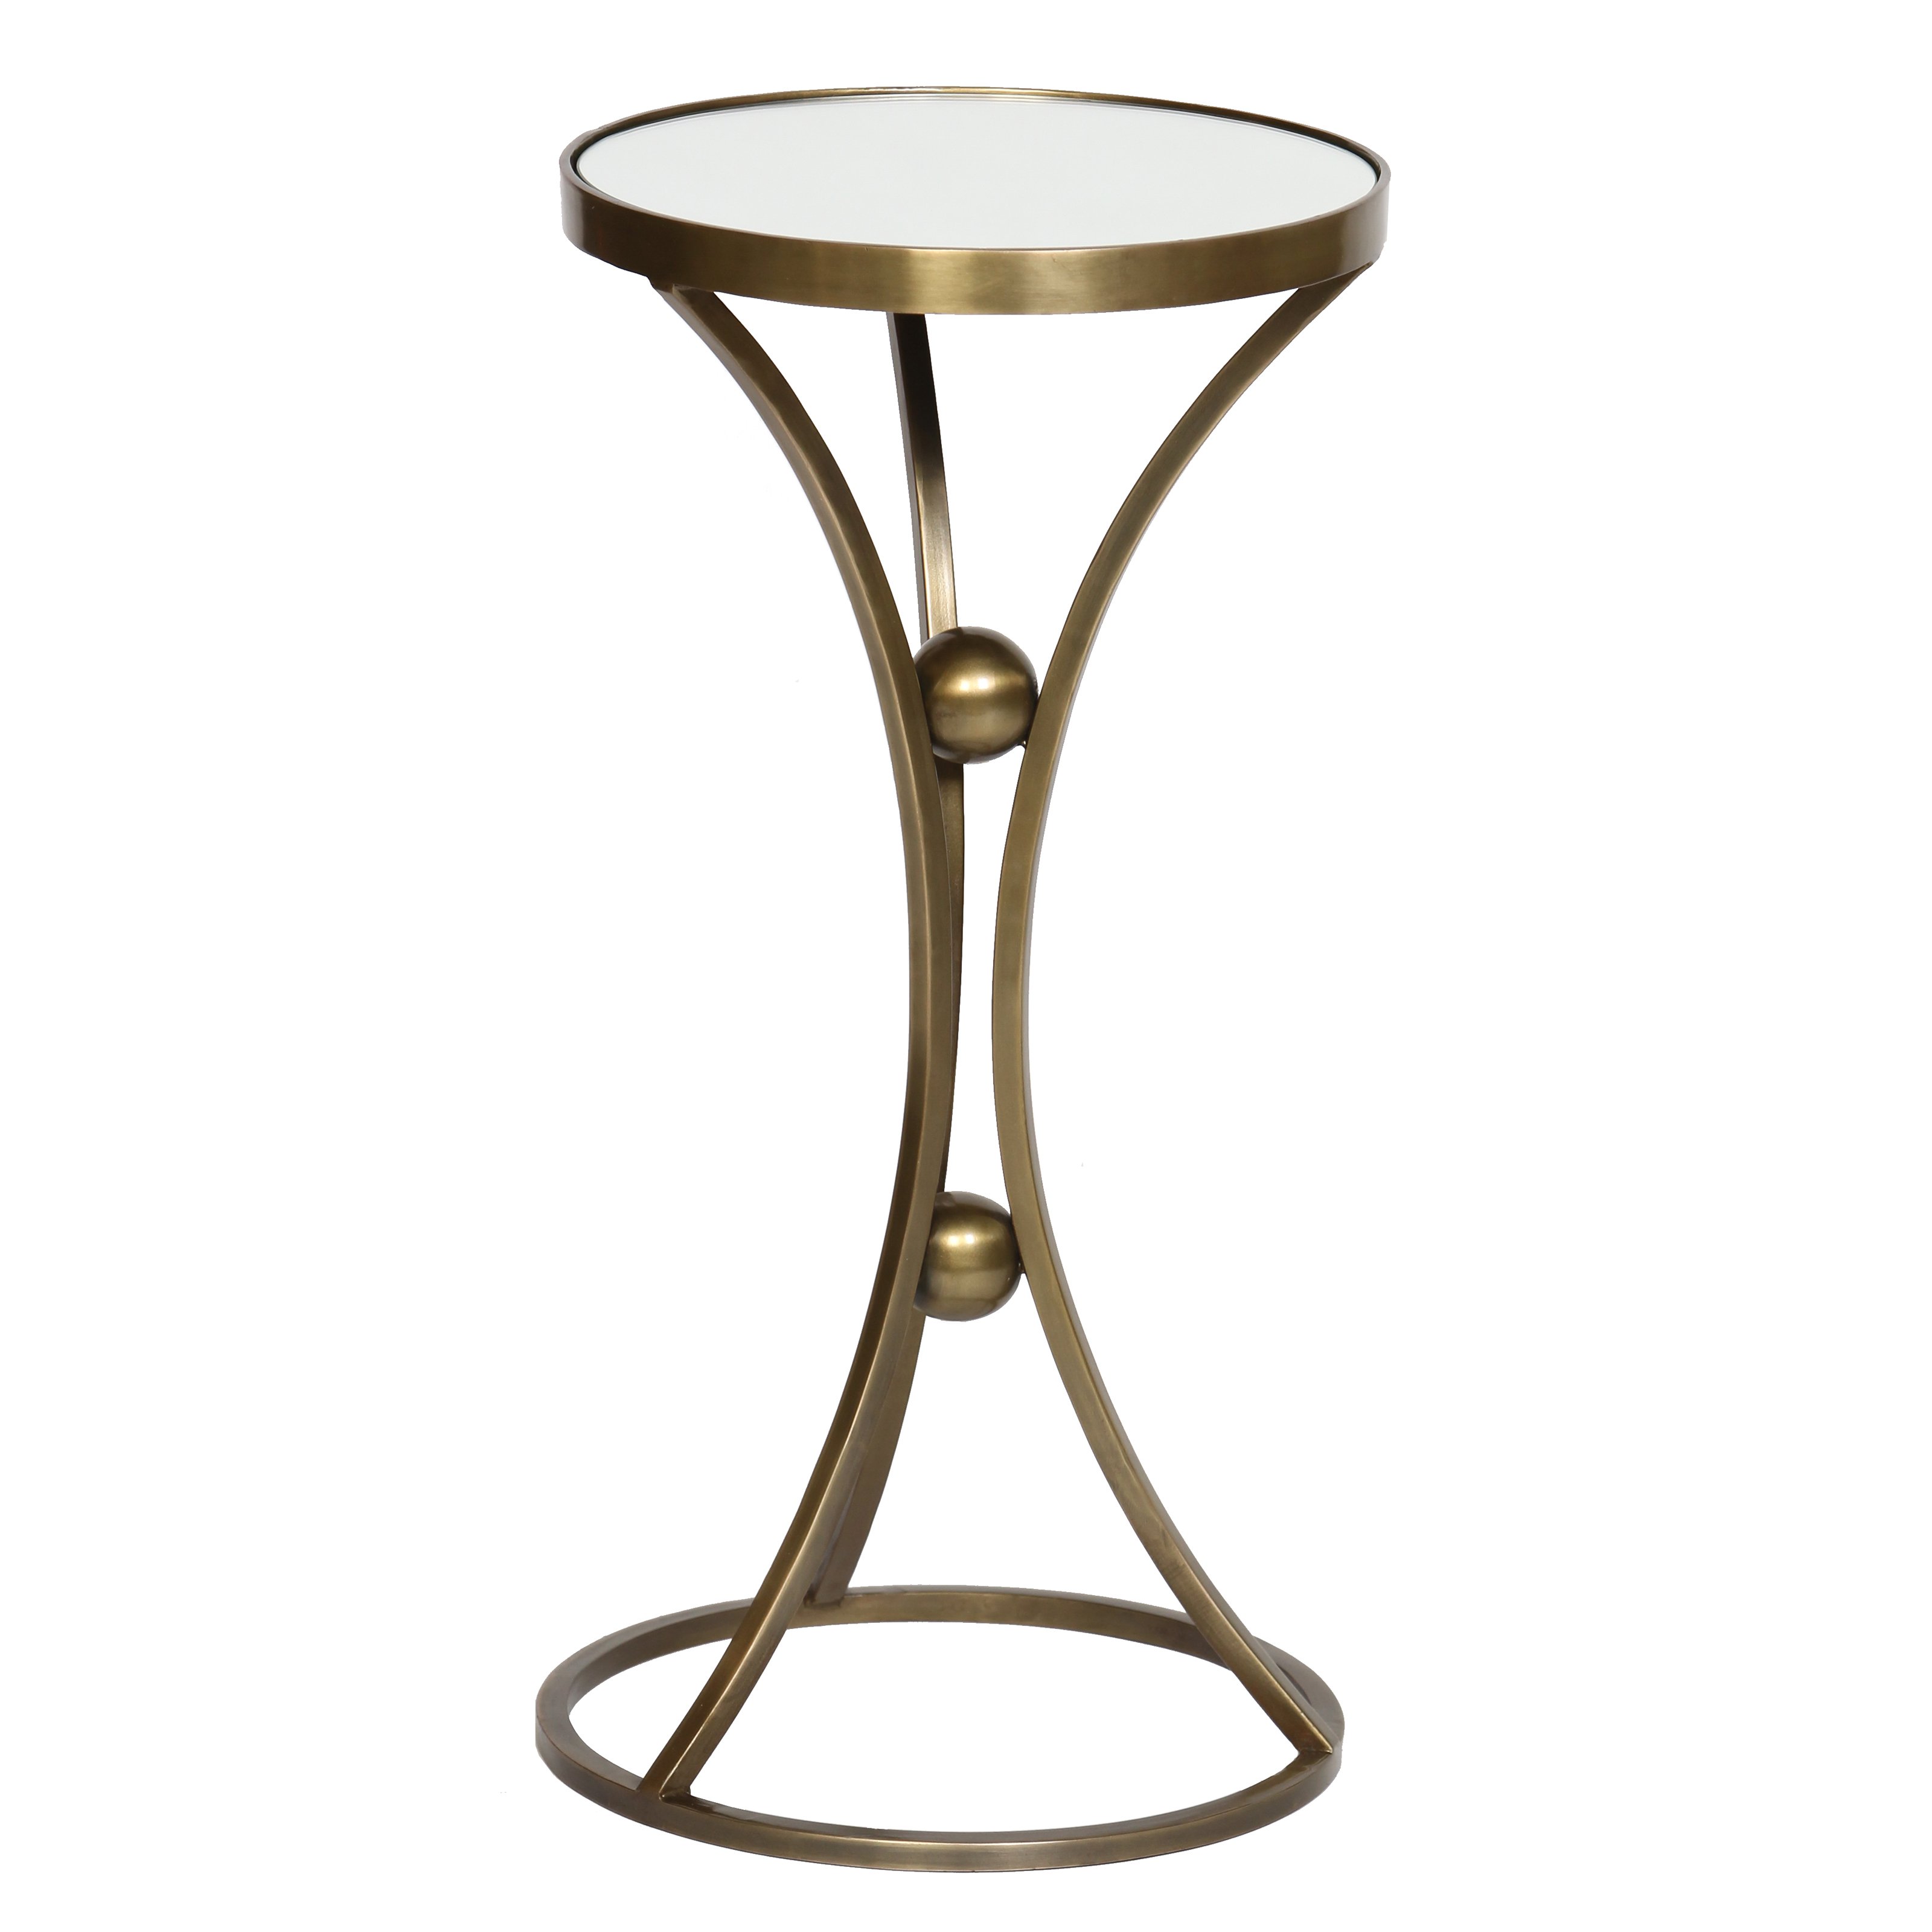 prima legged accent table antique brass round wine cupboard small bar height hallway console farmhouse style dining room decorative tablecloths coffee with storage target